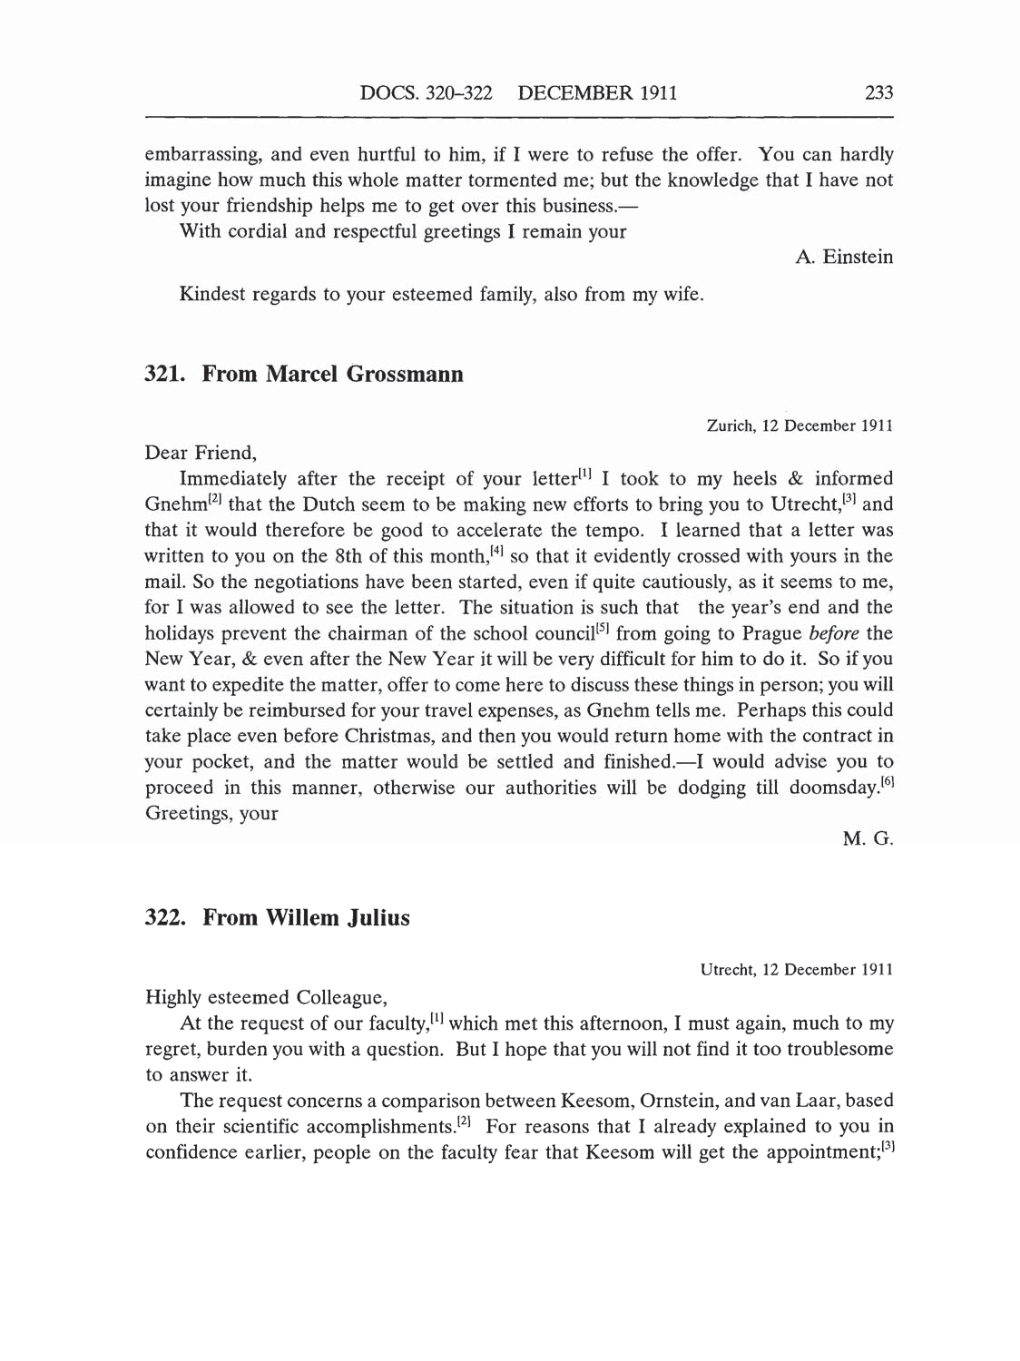 Volume 5: The Swiss Years: Correspondence, 1902-1914 (English translation supplement) page 233